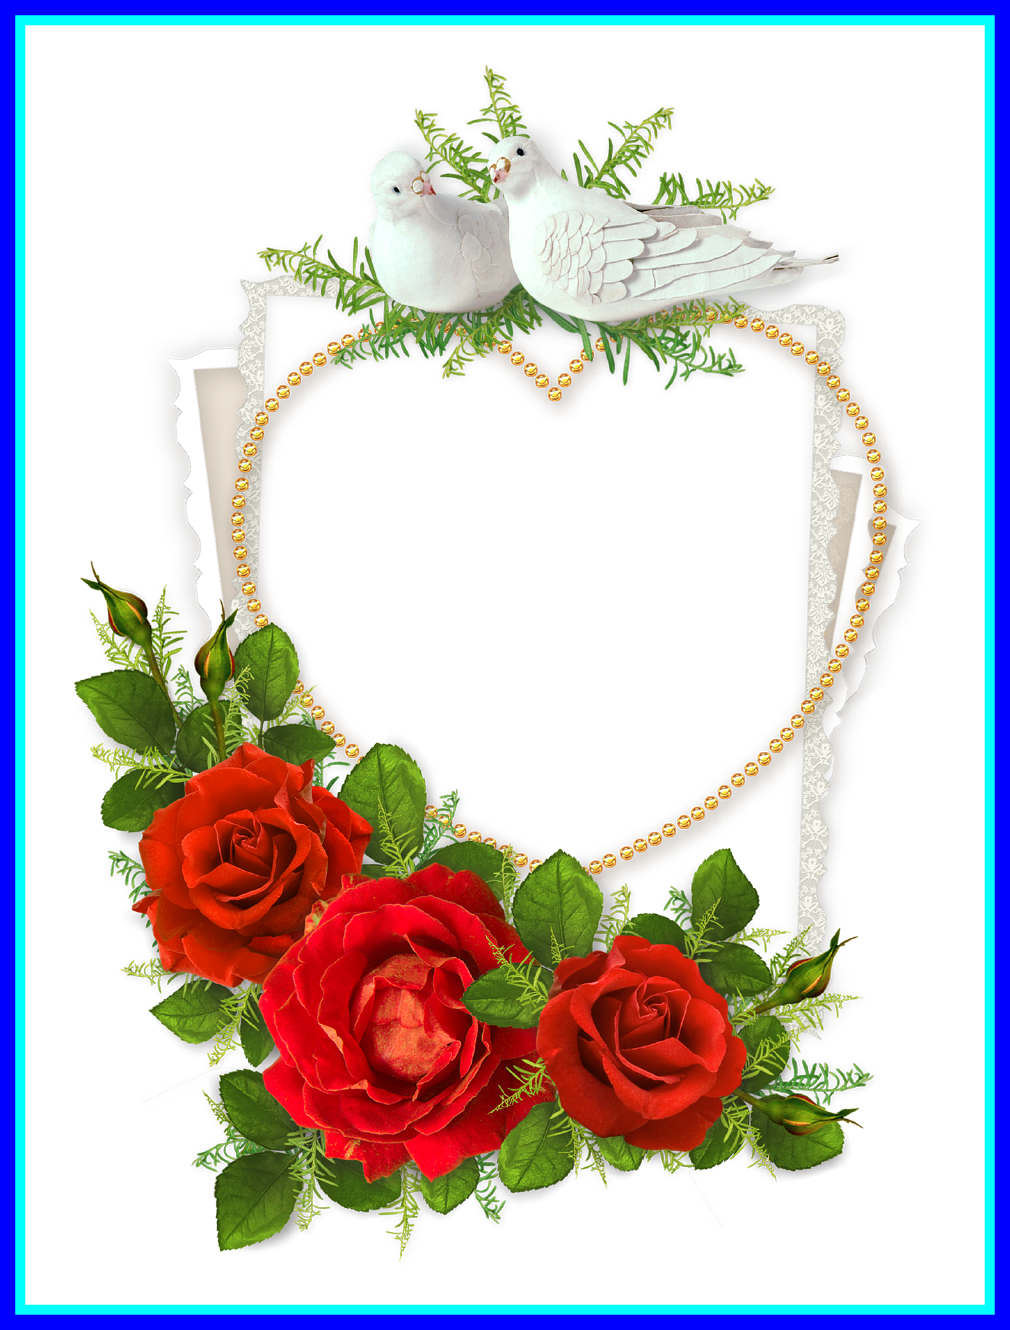 Best Heart Shaped Photo Frame With Doves And Red Crafts - Happy Monday New Week (1010x1330)